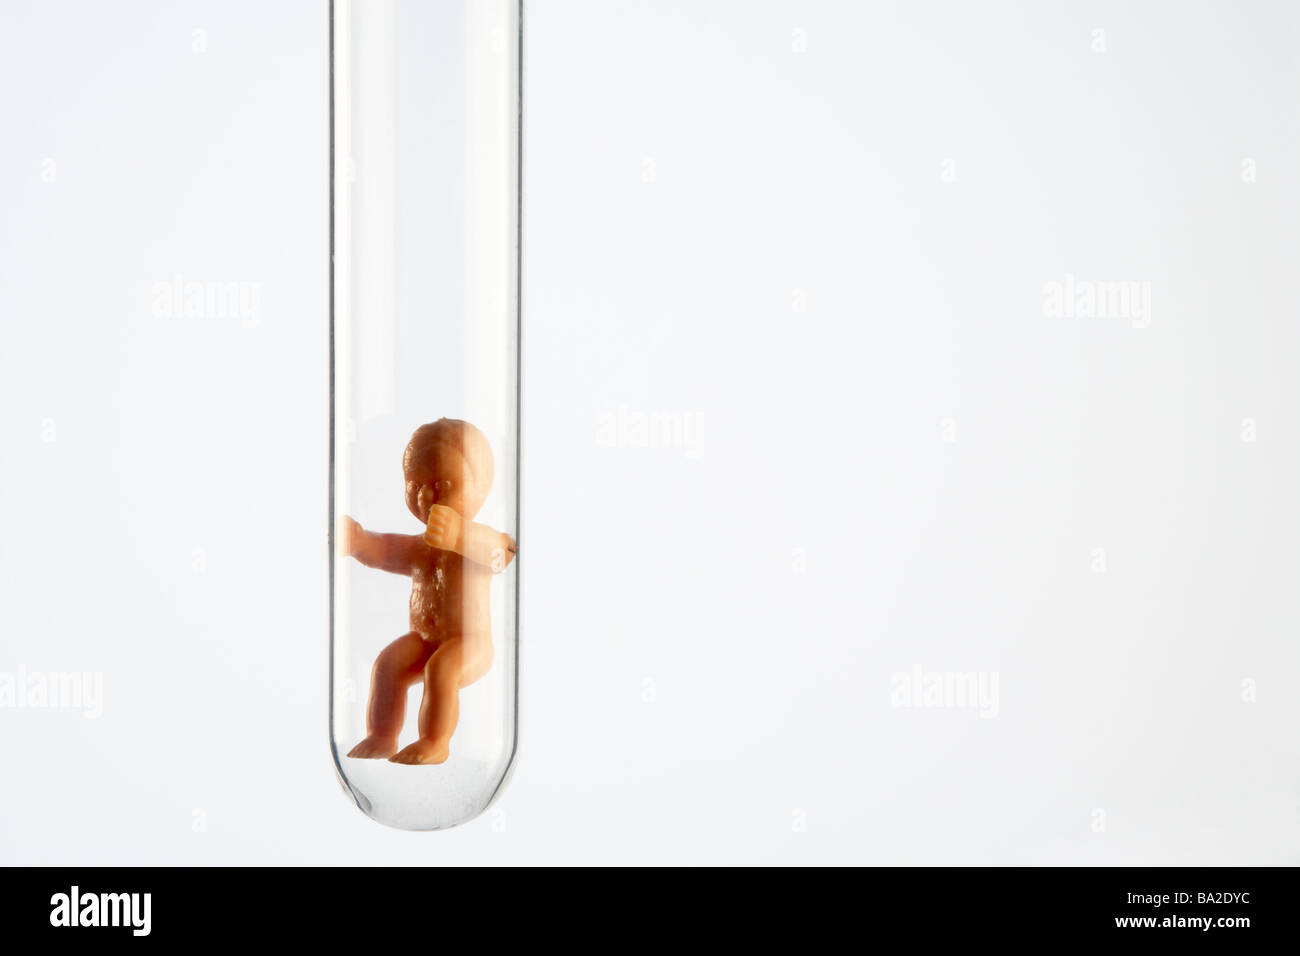 Baby Figurine In A Test Tube Stock Photo